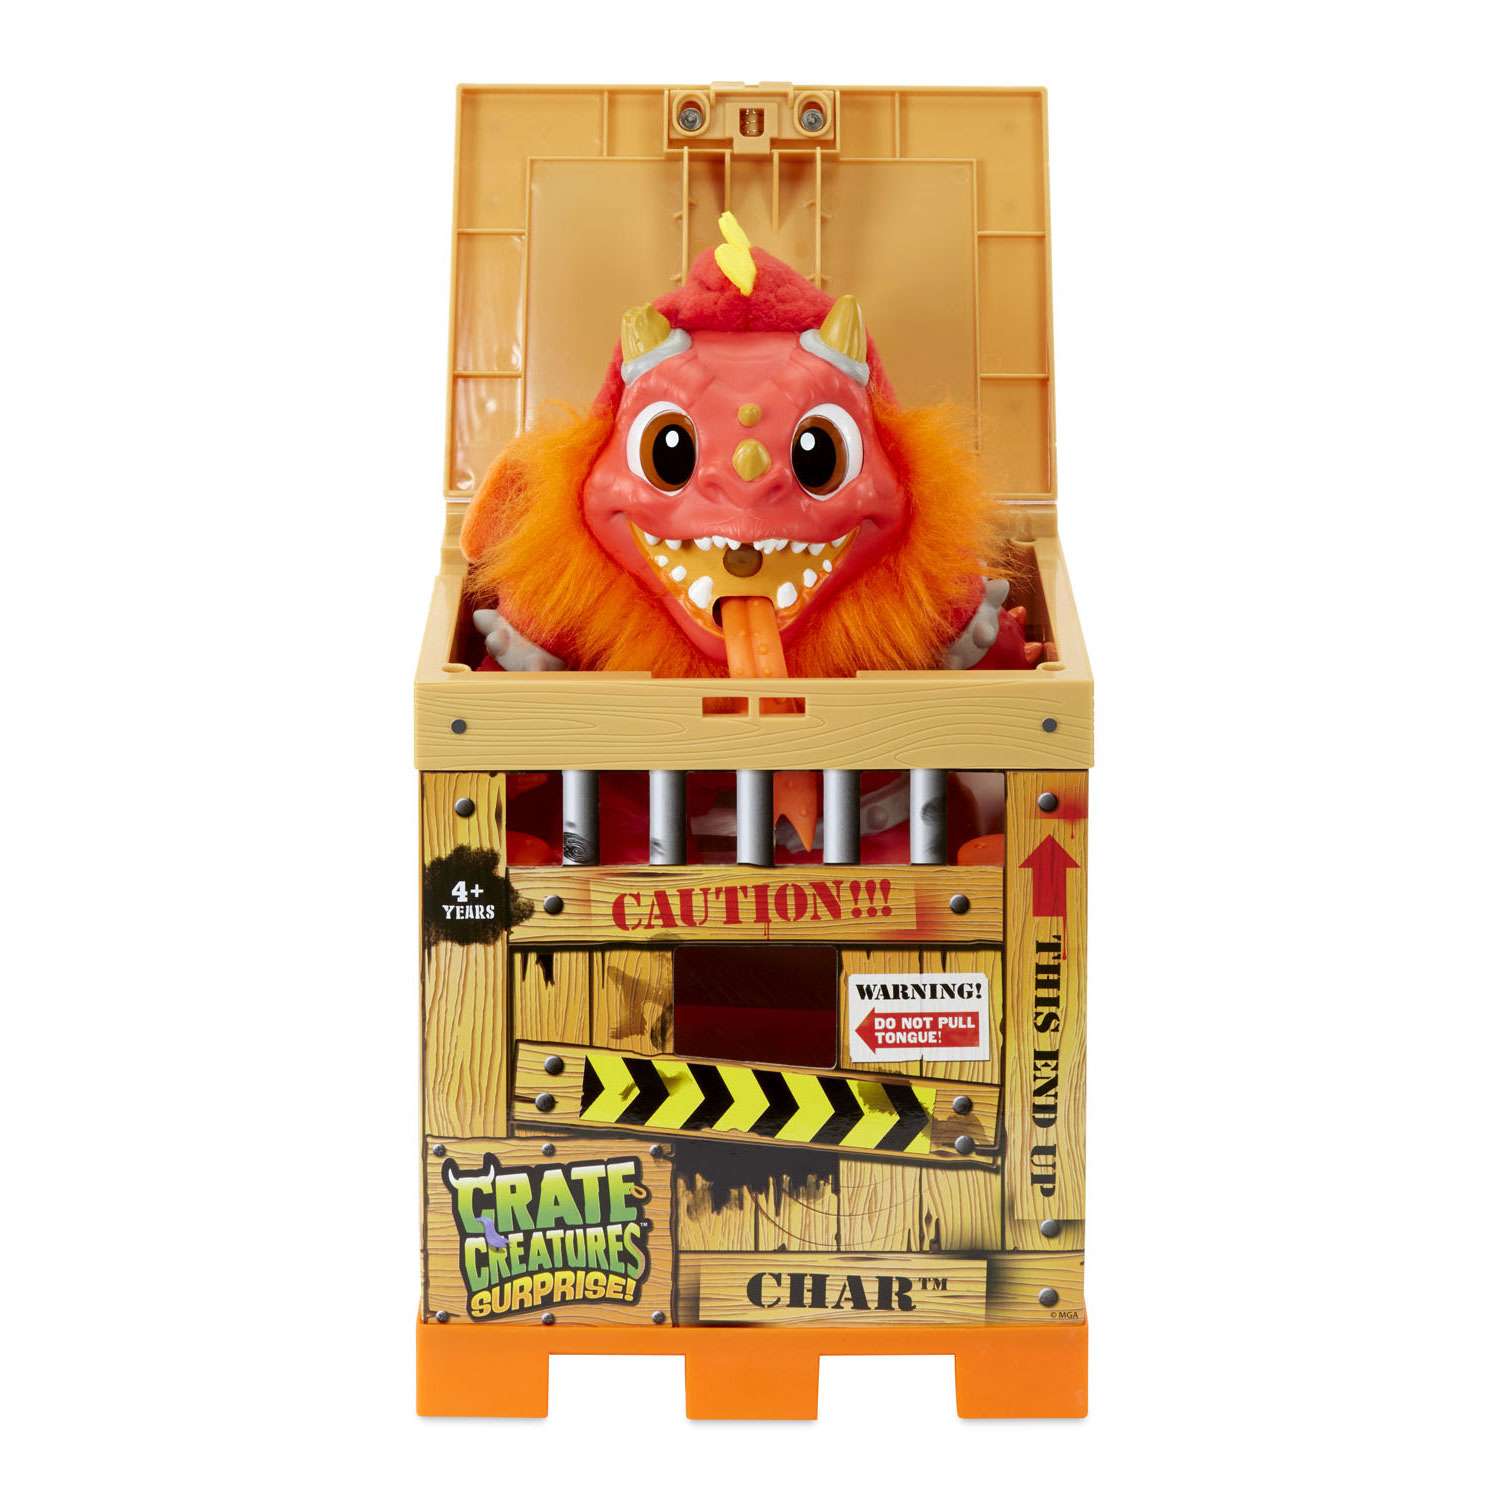 Crate Creatures Surprise Monster - Red Dragon